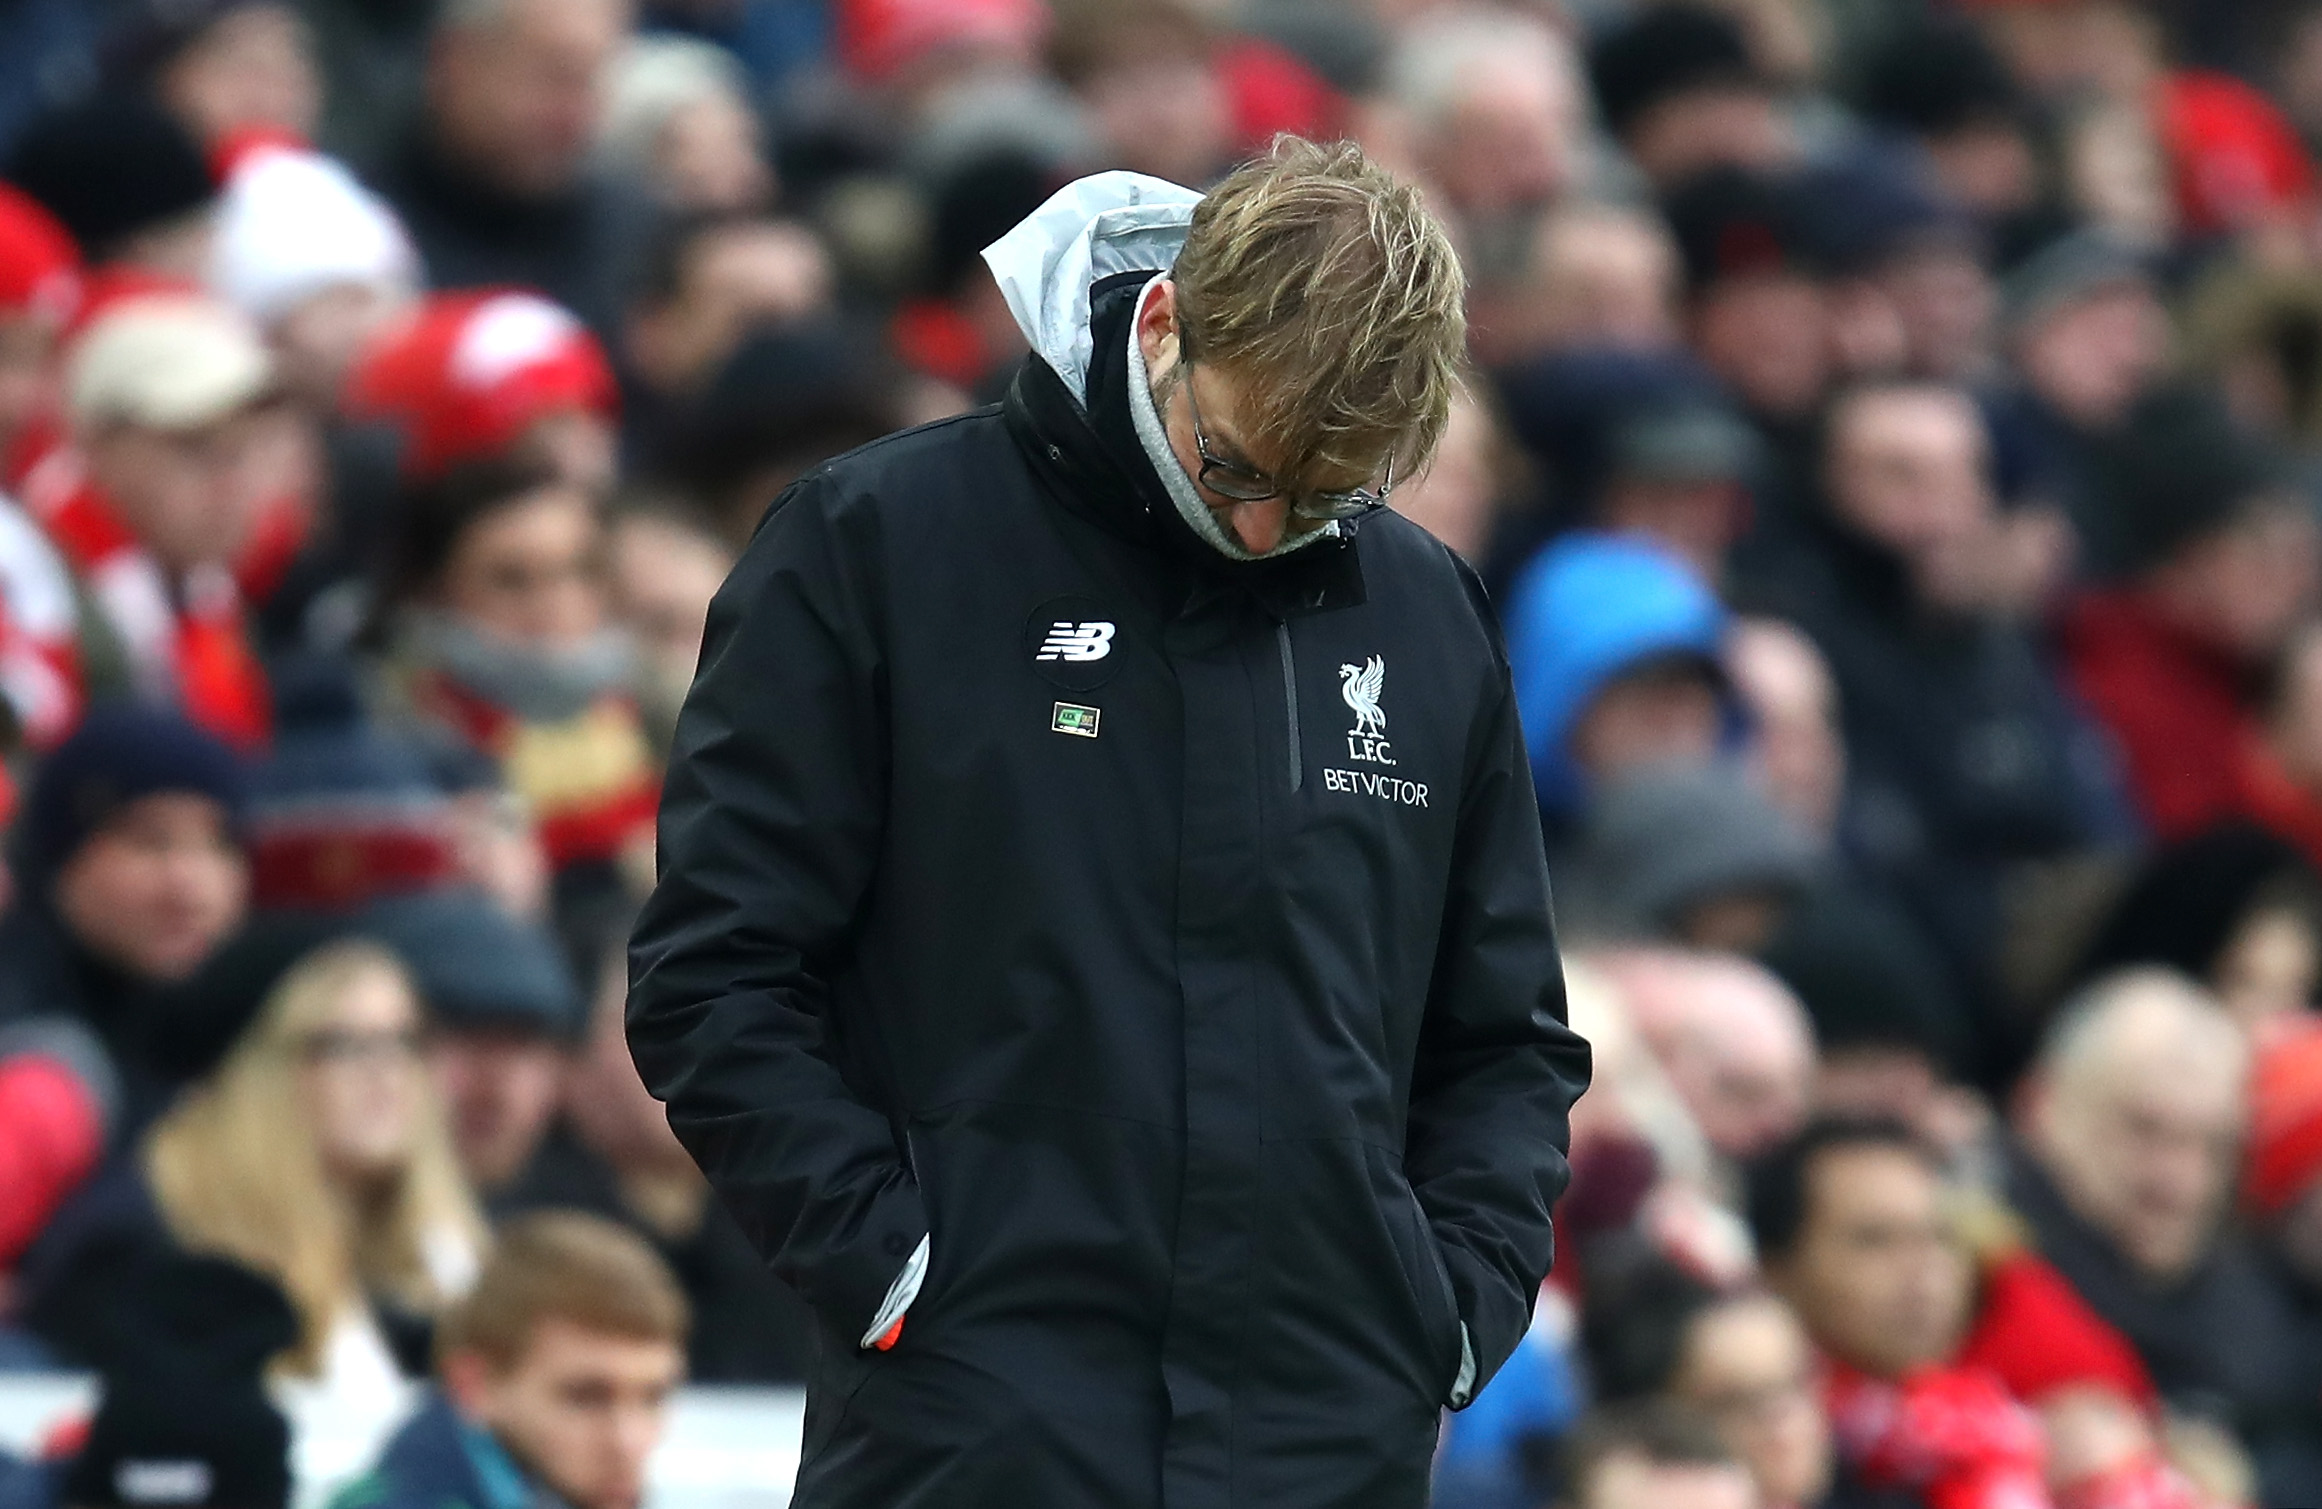 LIVERPOOL, ENGLAND - JANUARY 21: Jurgen Klopp, Manager of Liverpool looks dejected during the Premier League match between Liverpool and Swansea City at Anfield on January 21, 2017 in Liverpool, England.  (Photo by Julian Finney/Getty Images)